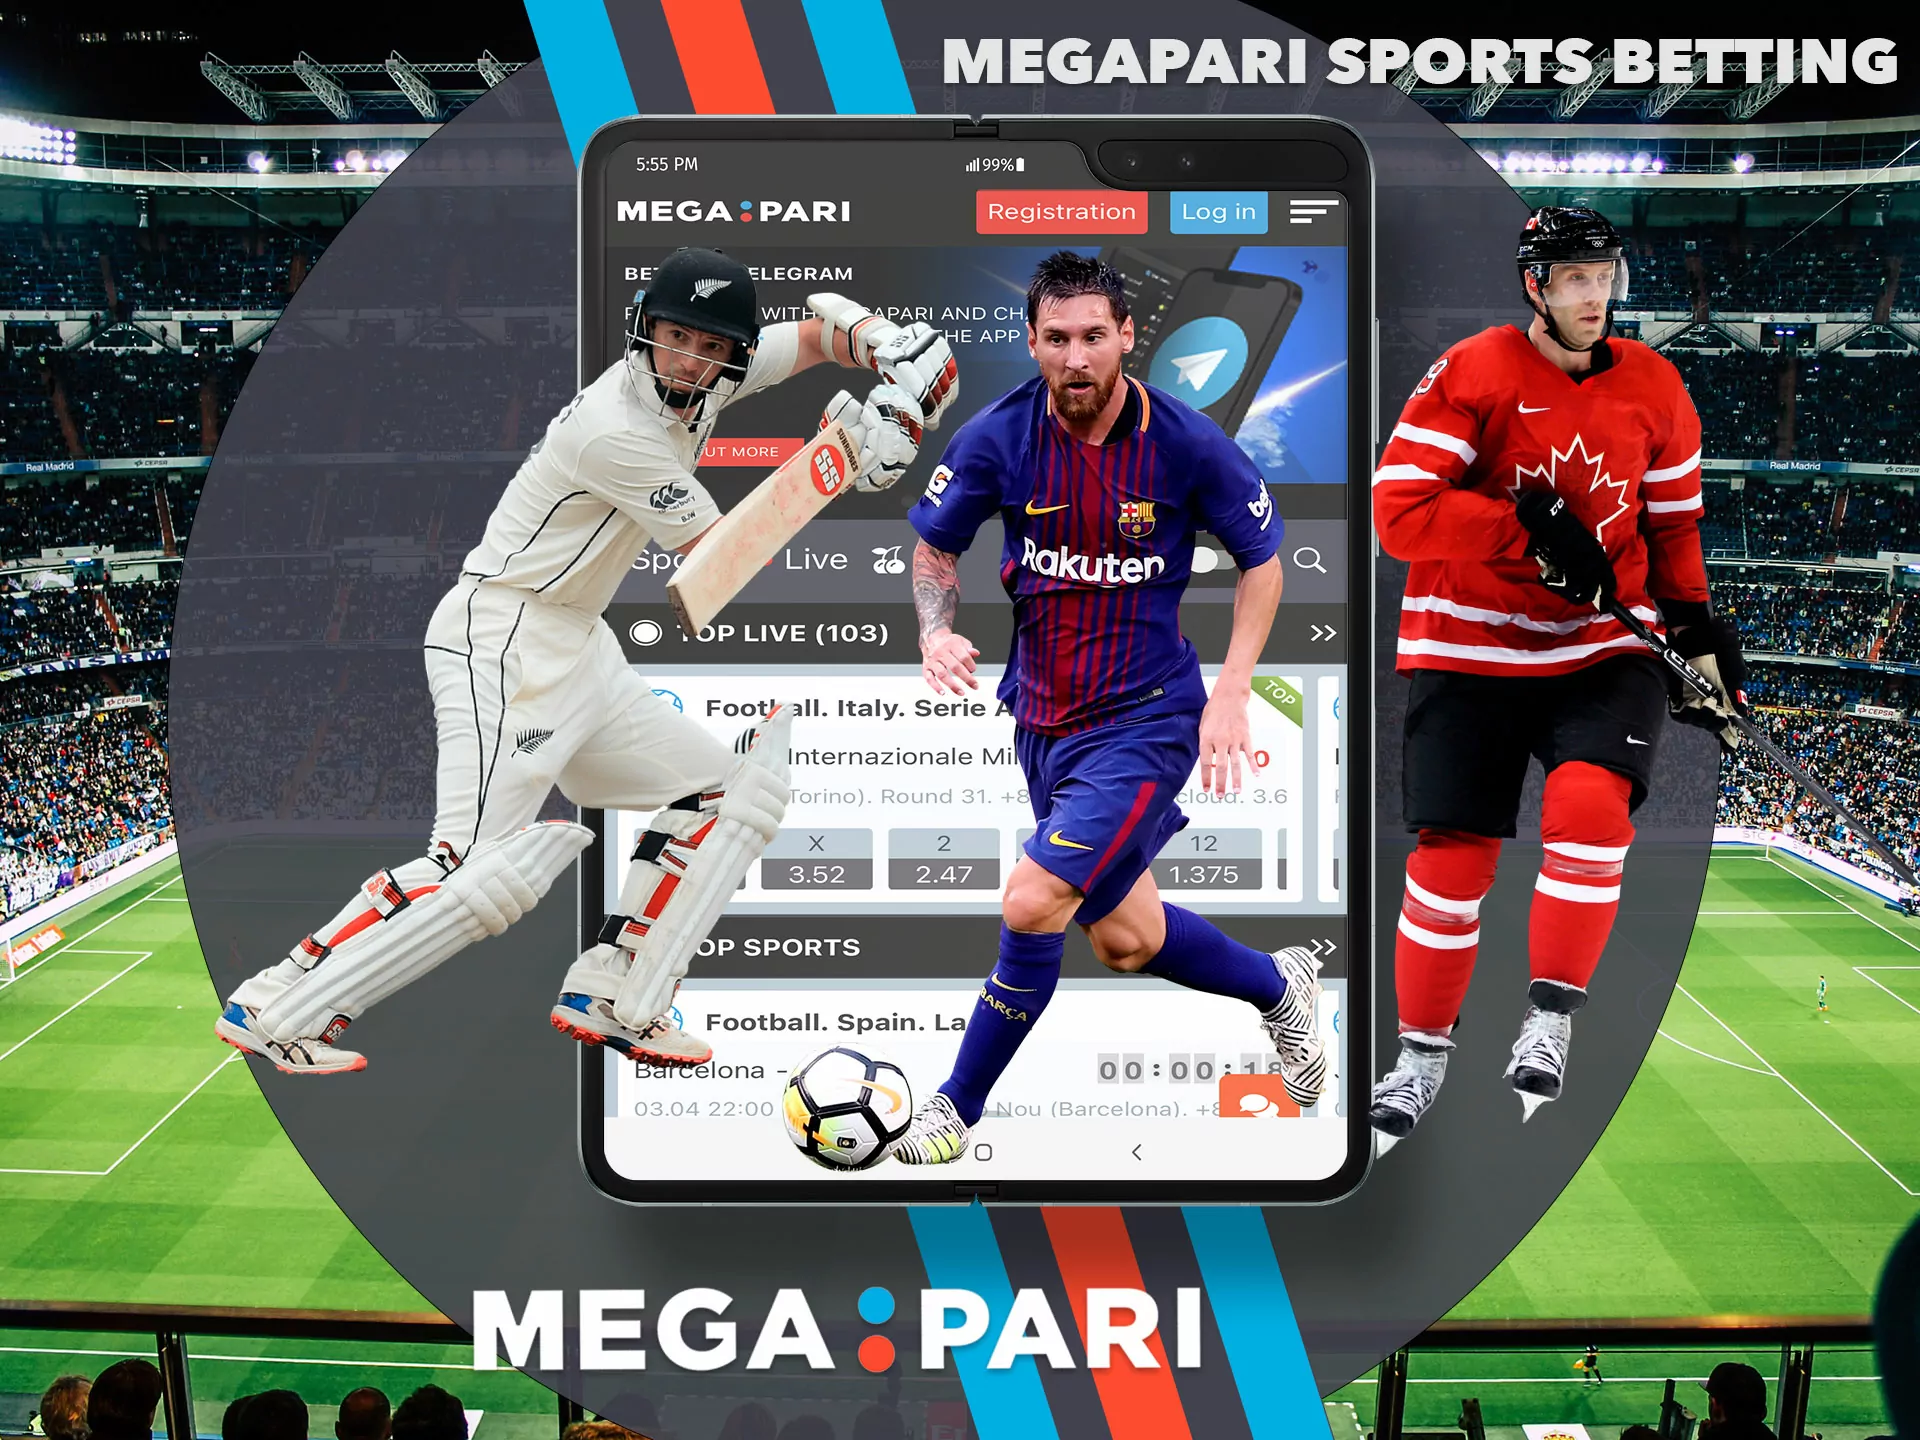 In the Megapari app, you can bet on both classic and some foreign sports.